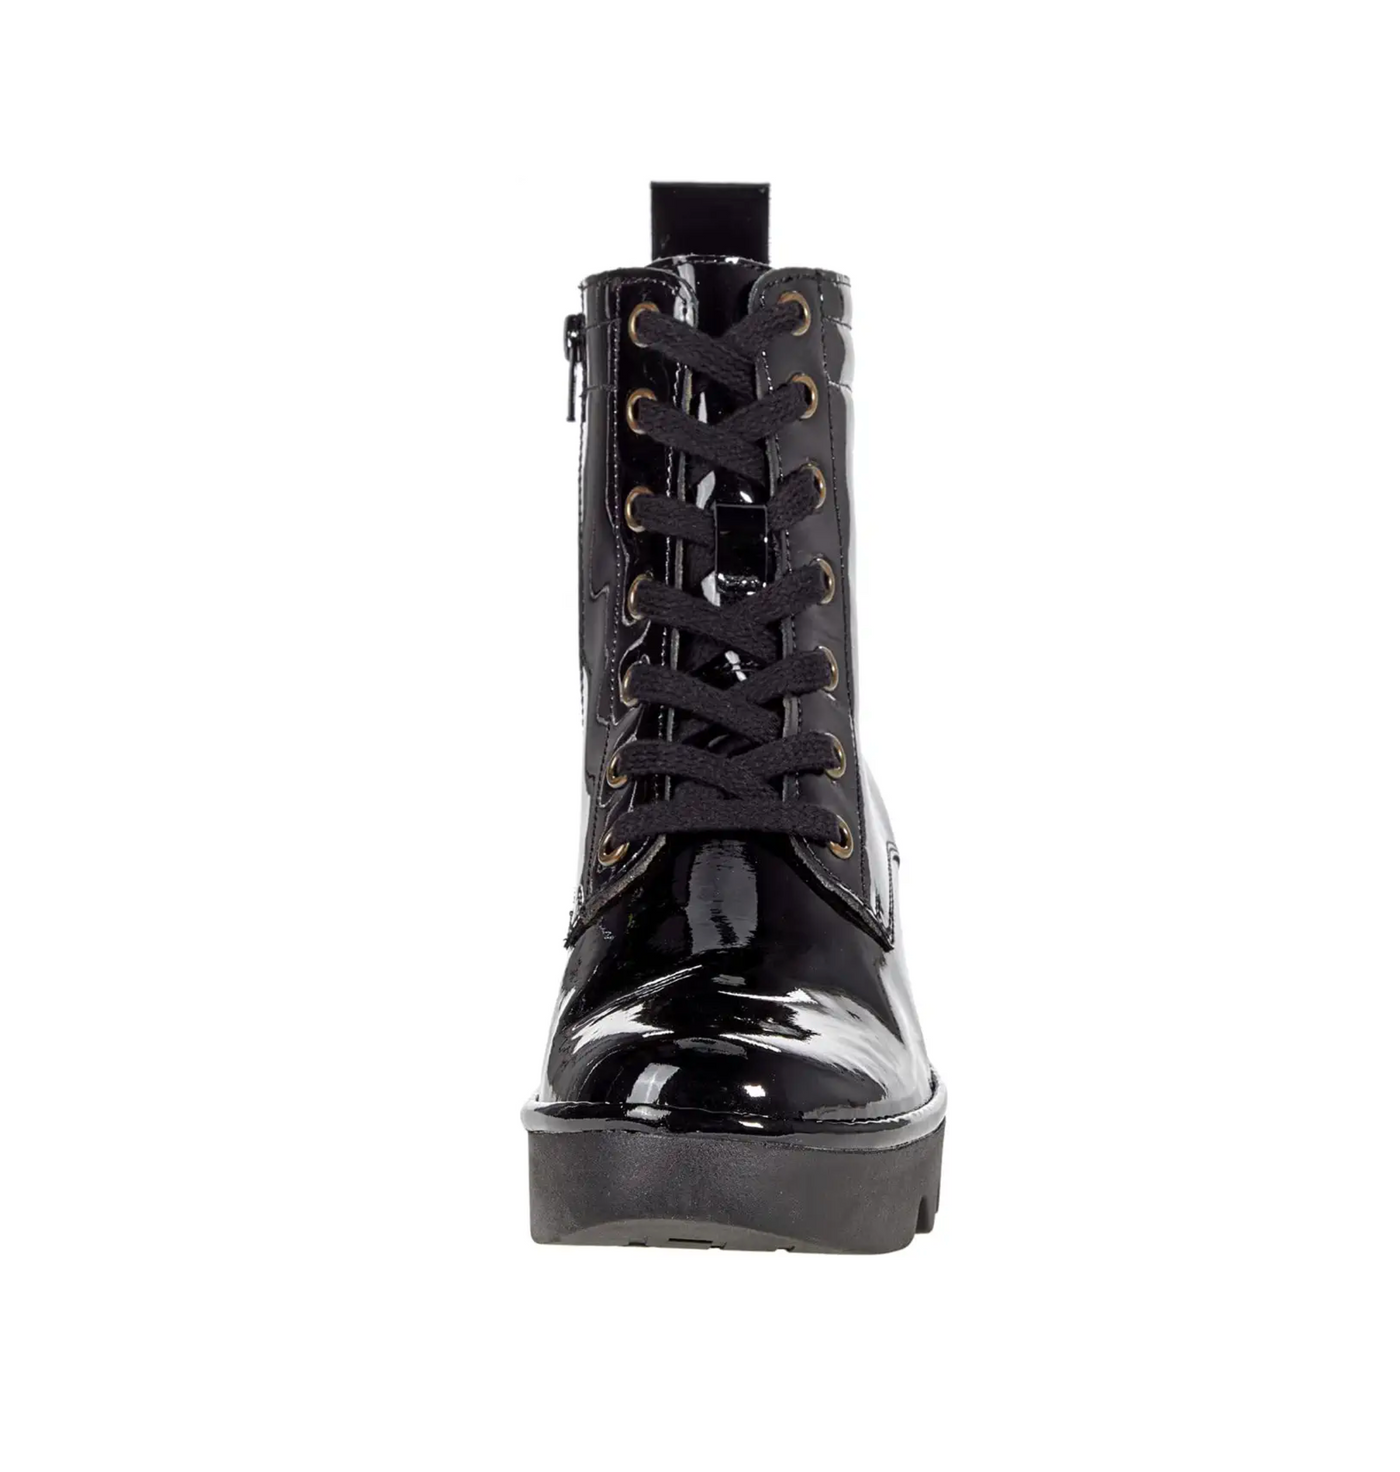 FLY LONDON BIAZ BLACK ATLANT - Women Boots - Collective Shoes 